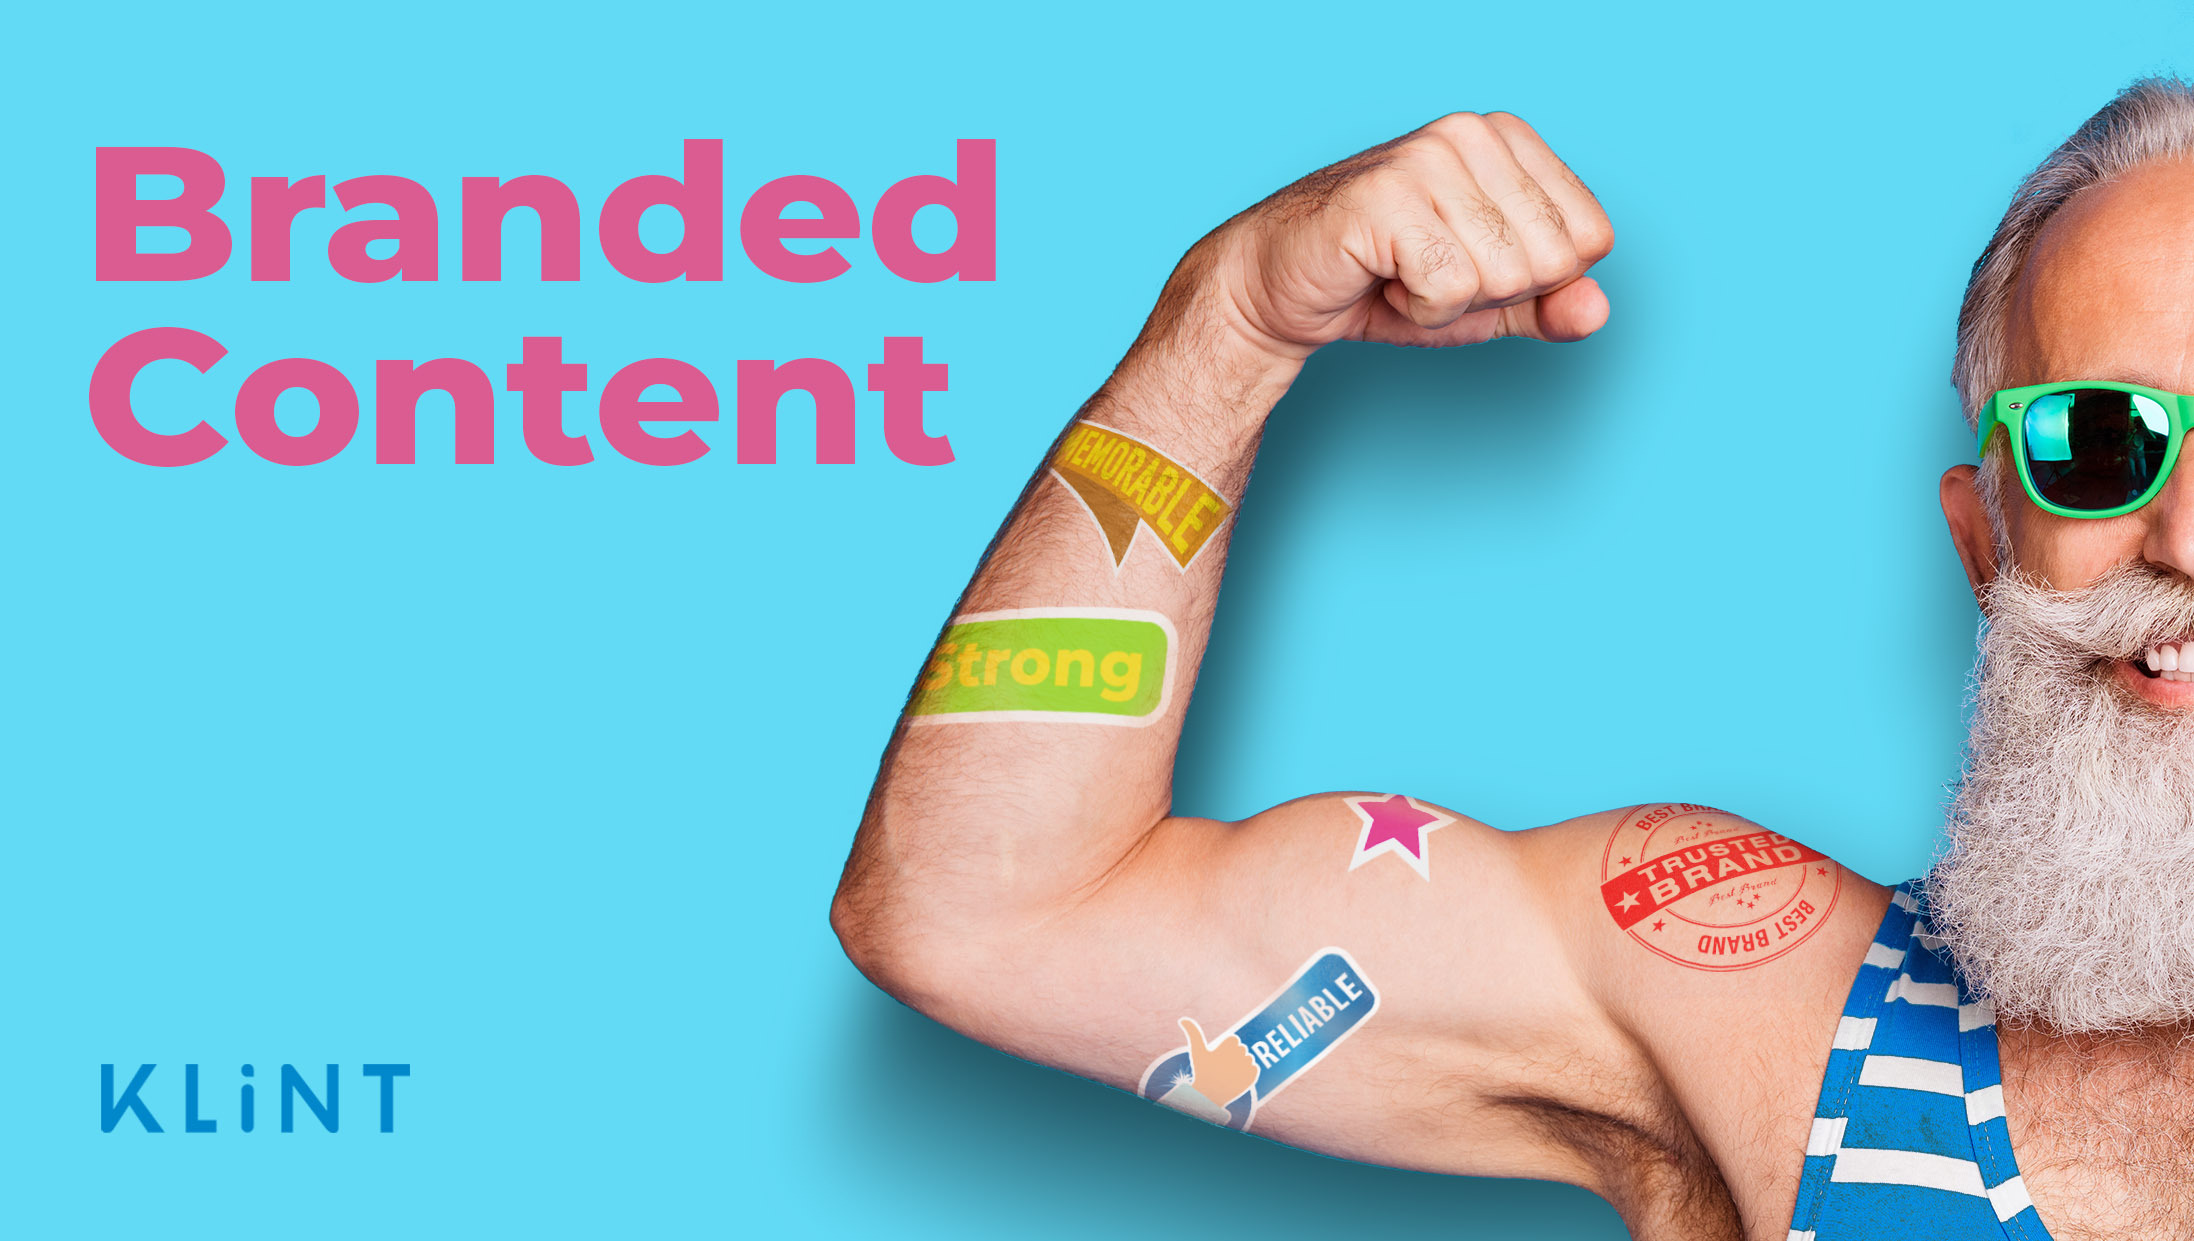 Old man with beard and sunglasses flexing his bicep. His arm is tattooed with brand logos. Text overlaid: "Branded content"